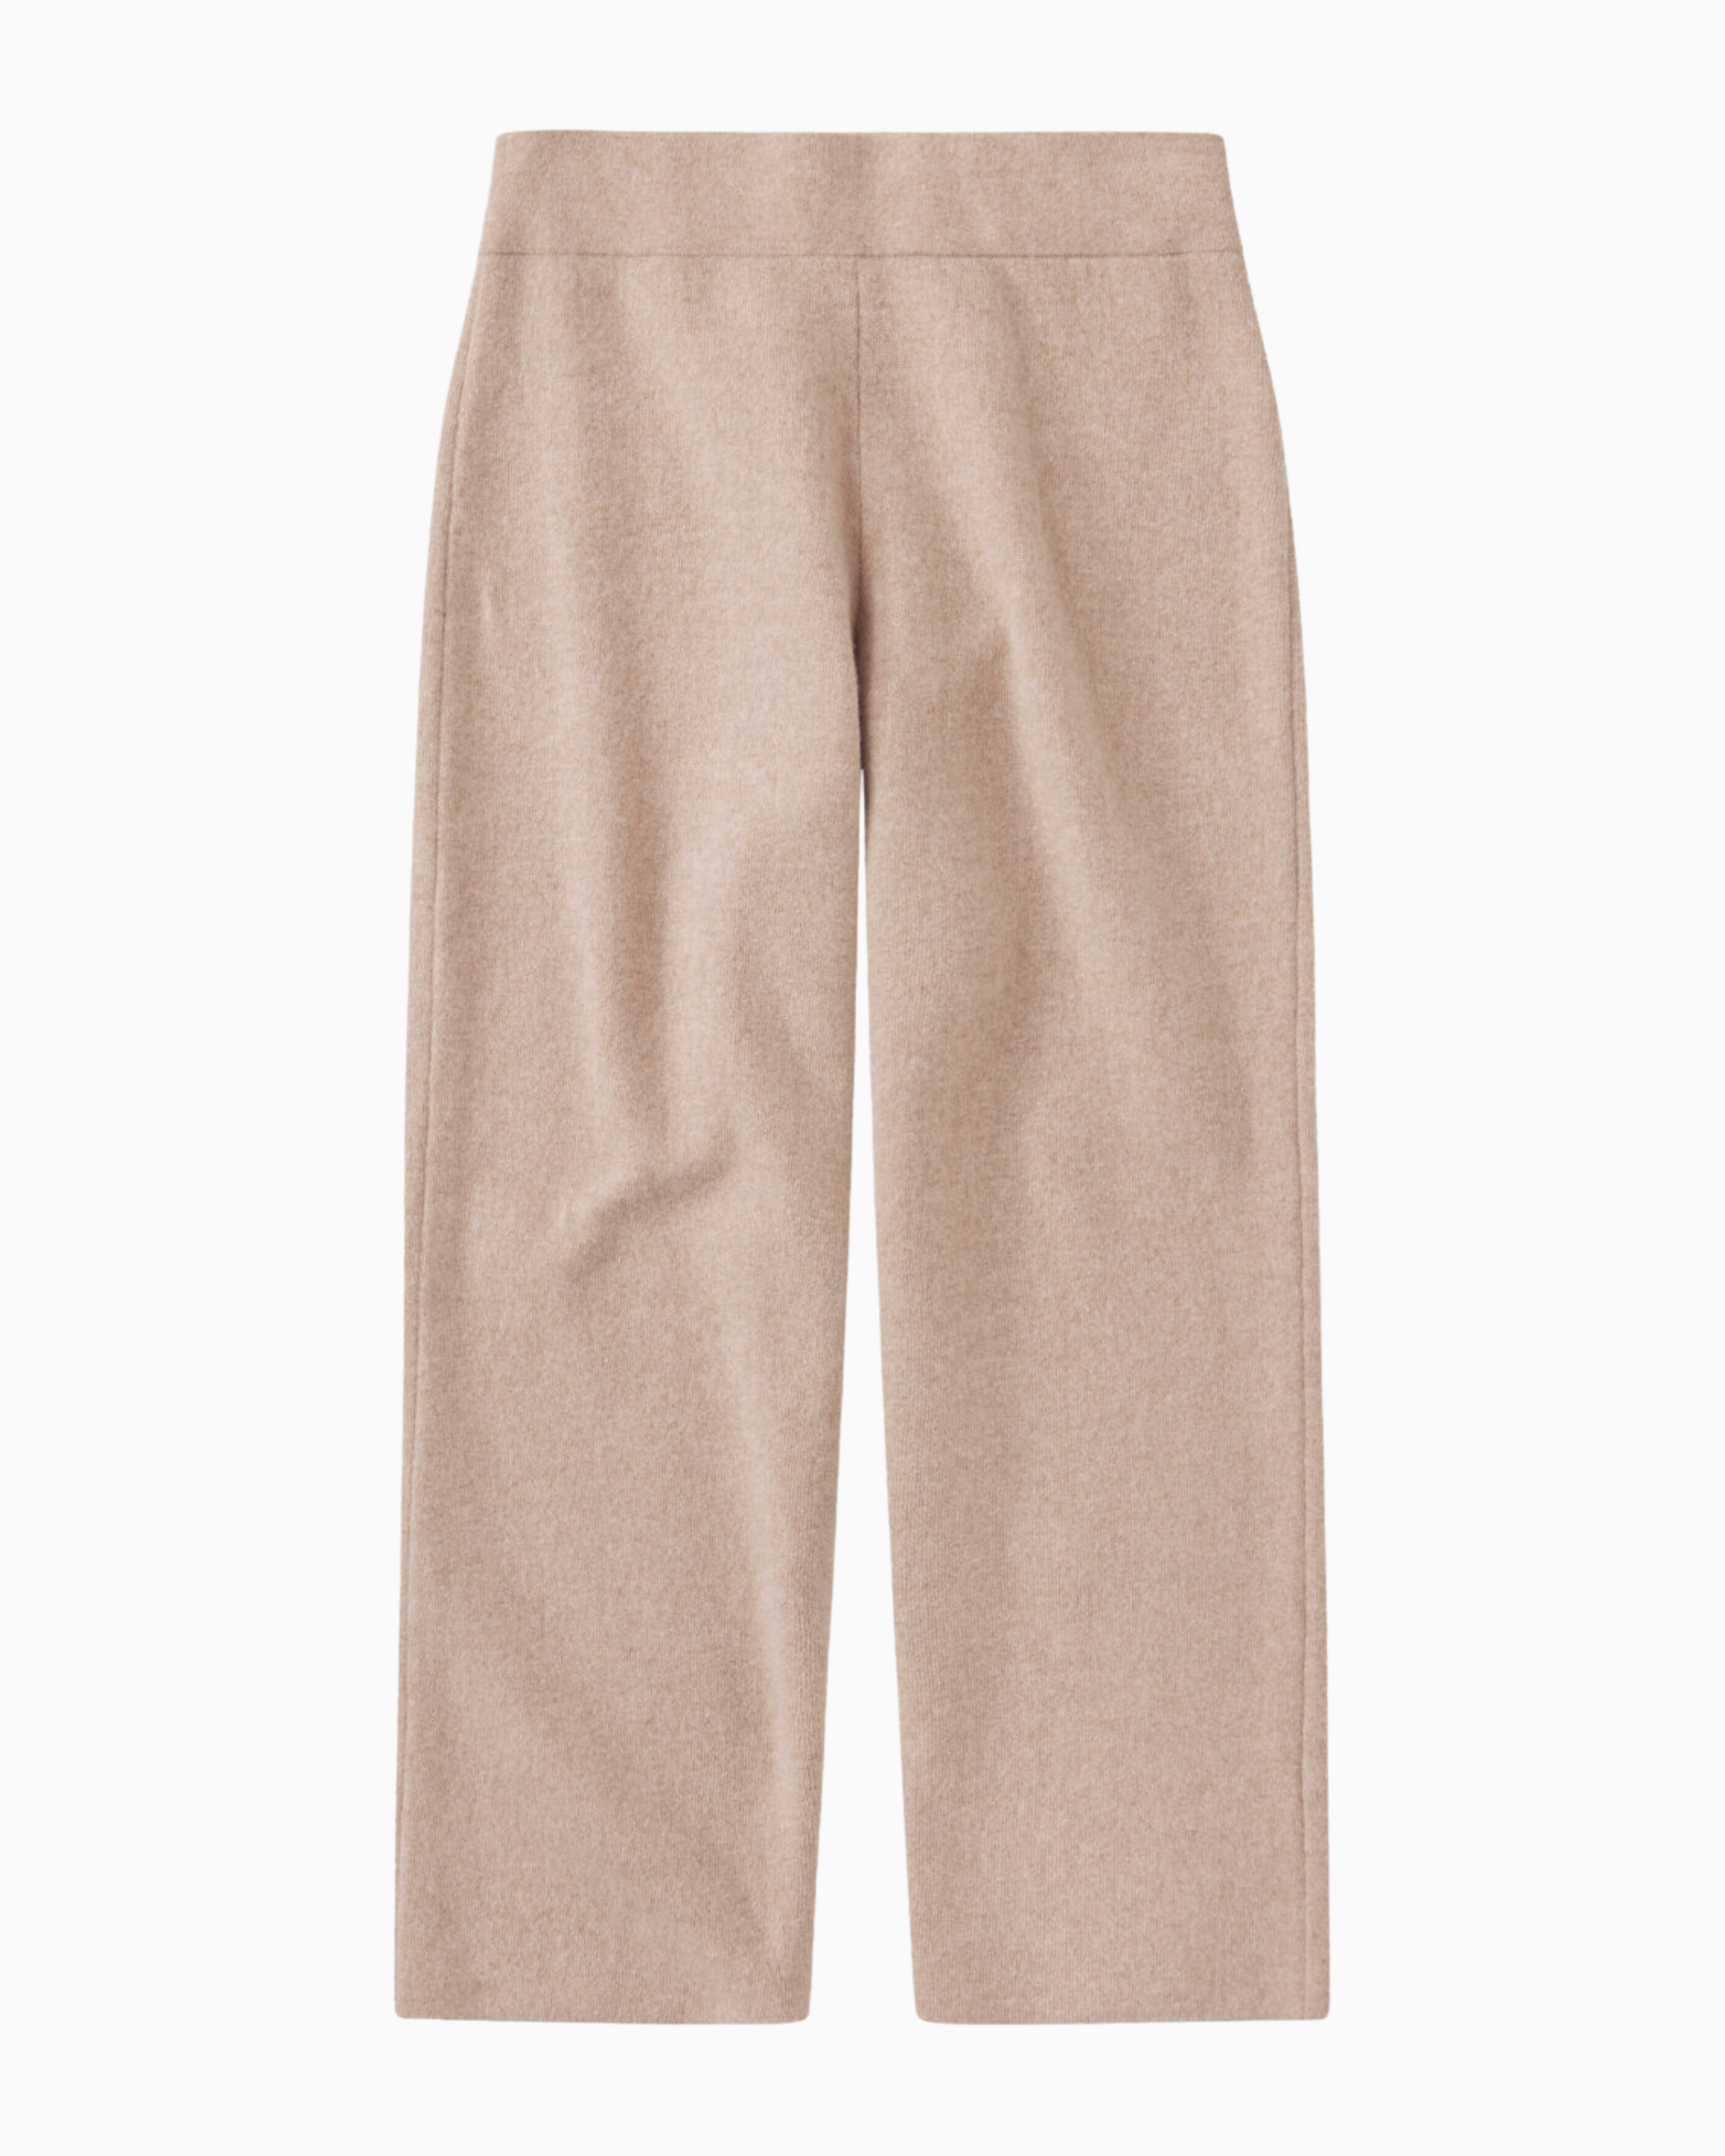 Closed Knitted Jogger in Chino Beige